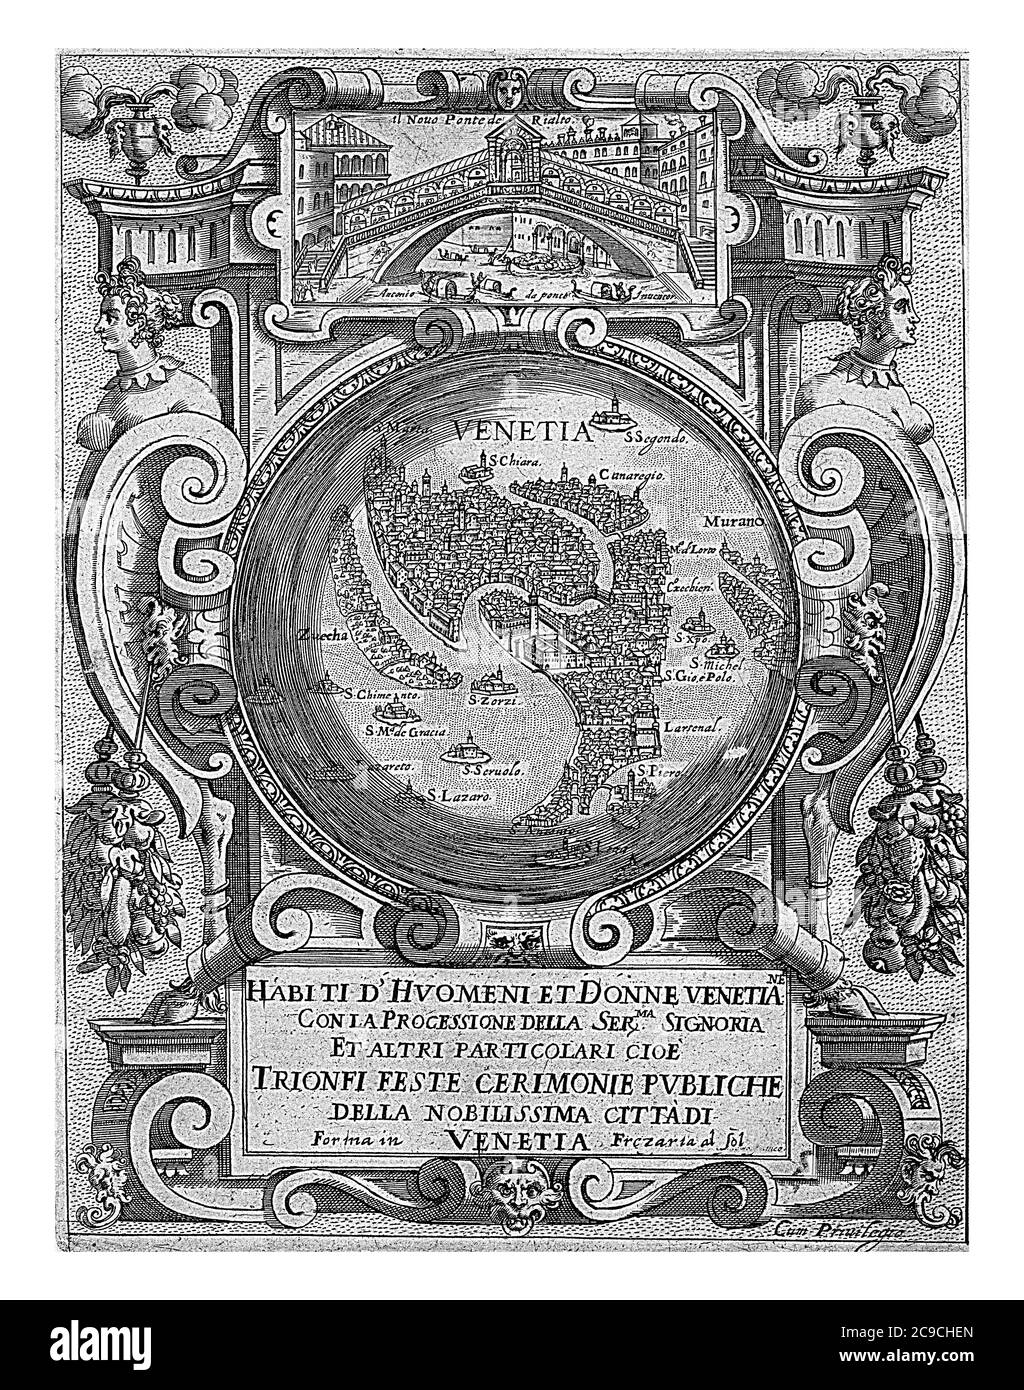 Title print with the Rialto Bridge in Venice, a map of Venice and the title, summarized in an ornamented frame, vintage engraving. Stock Photo